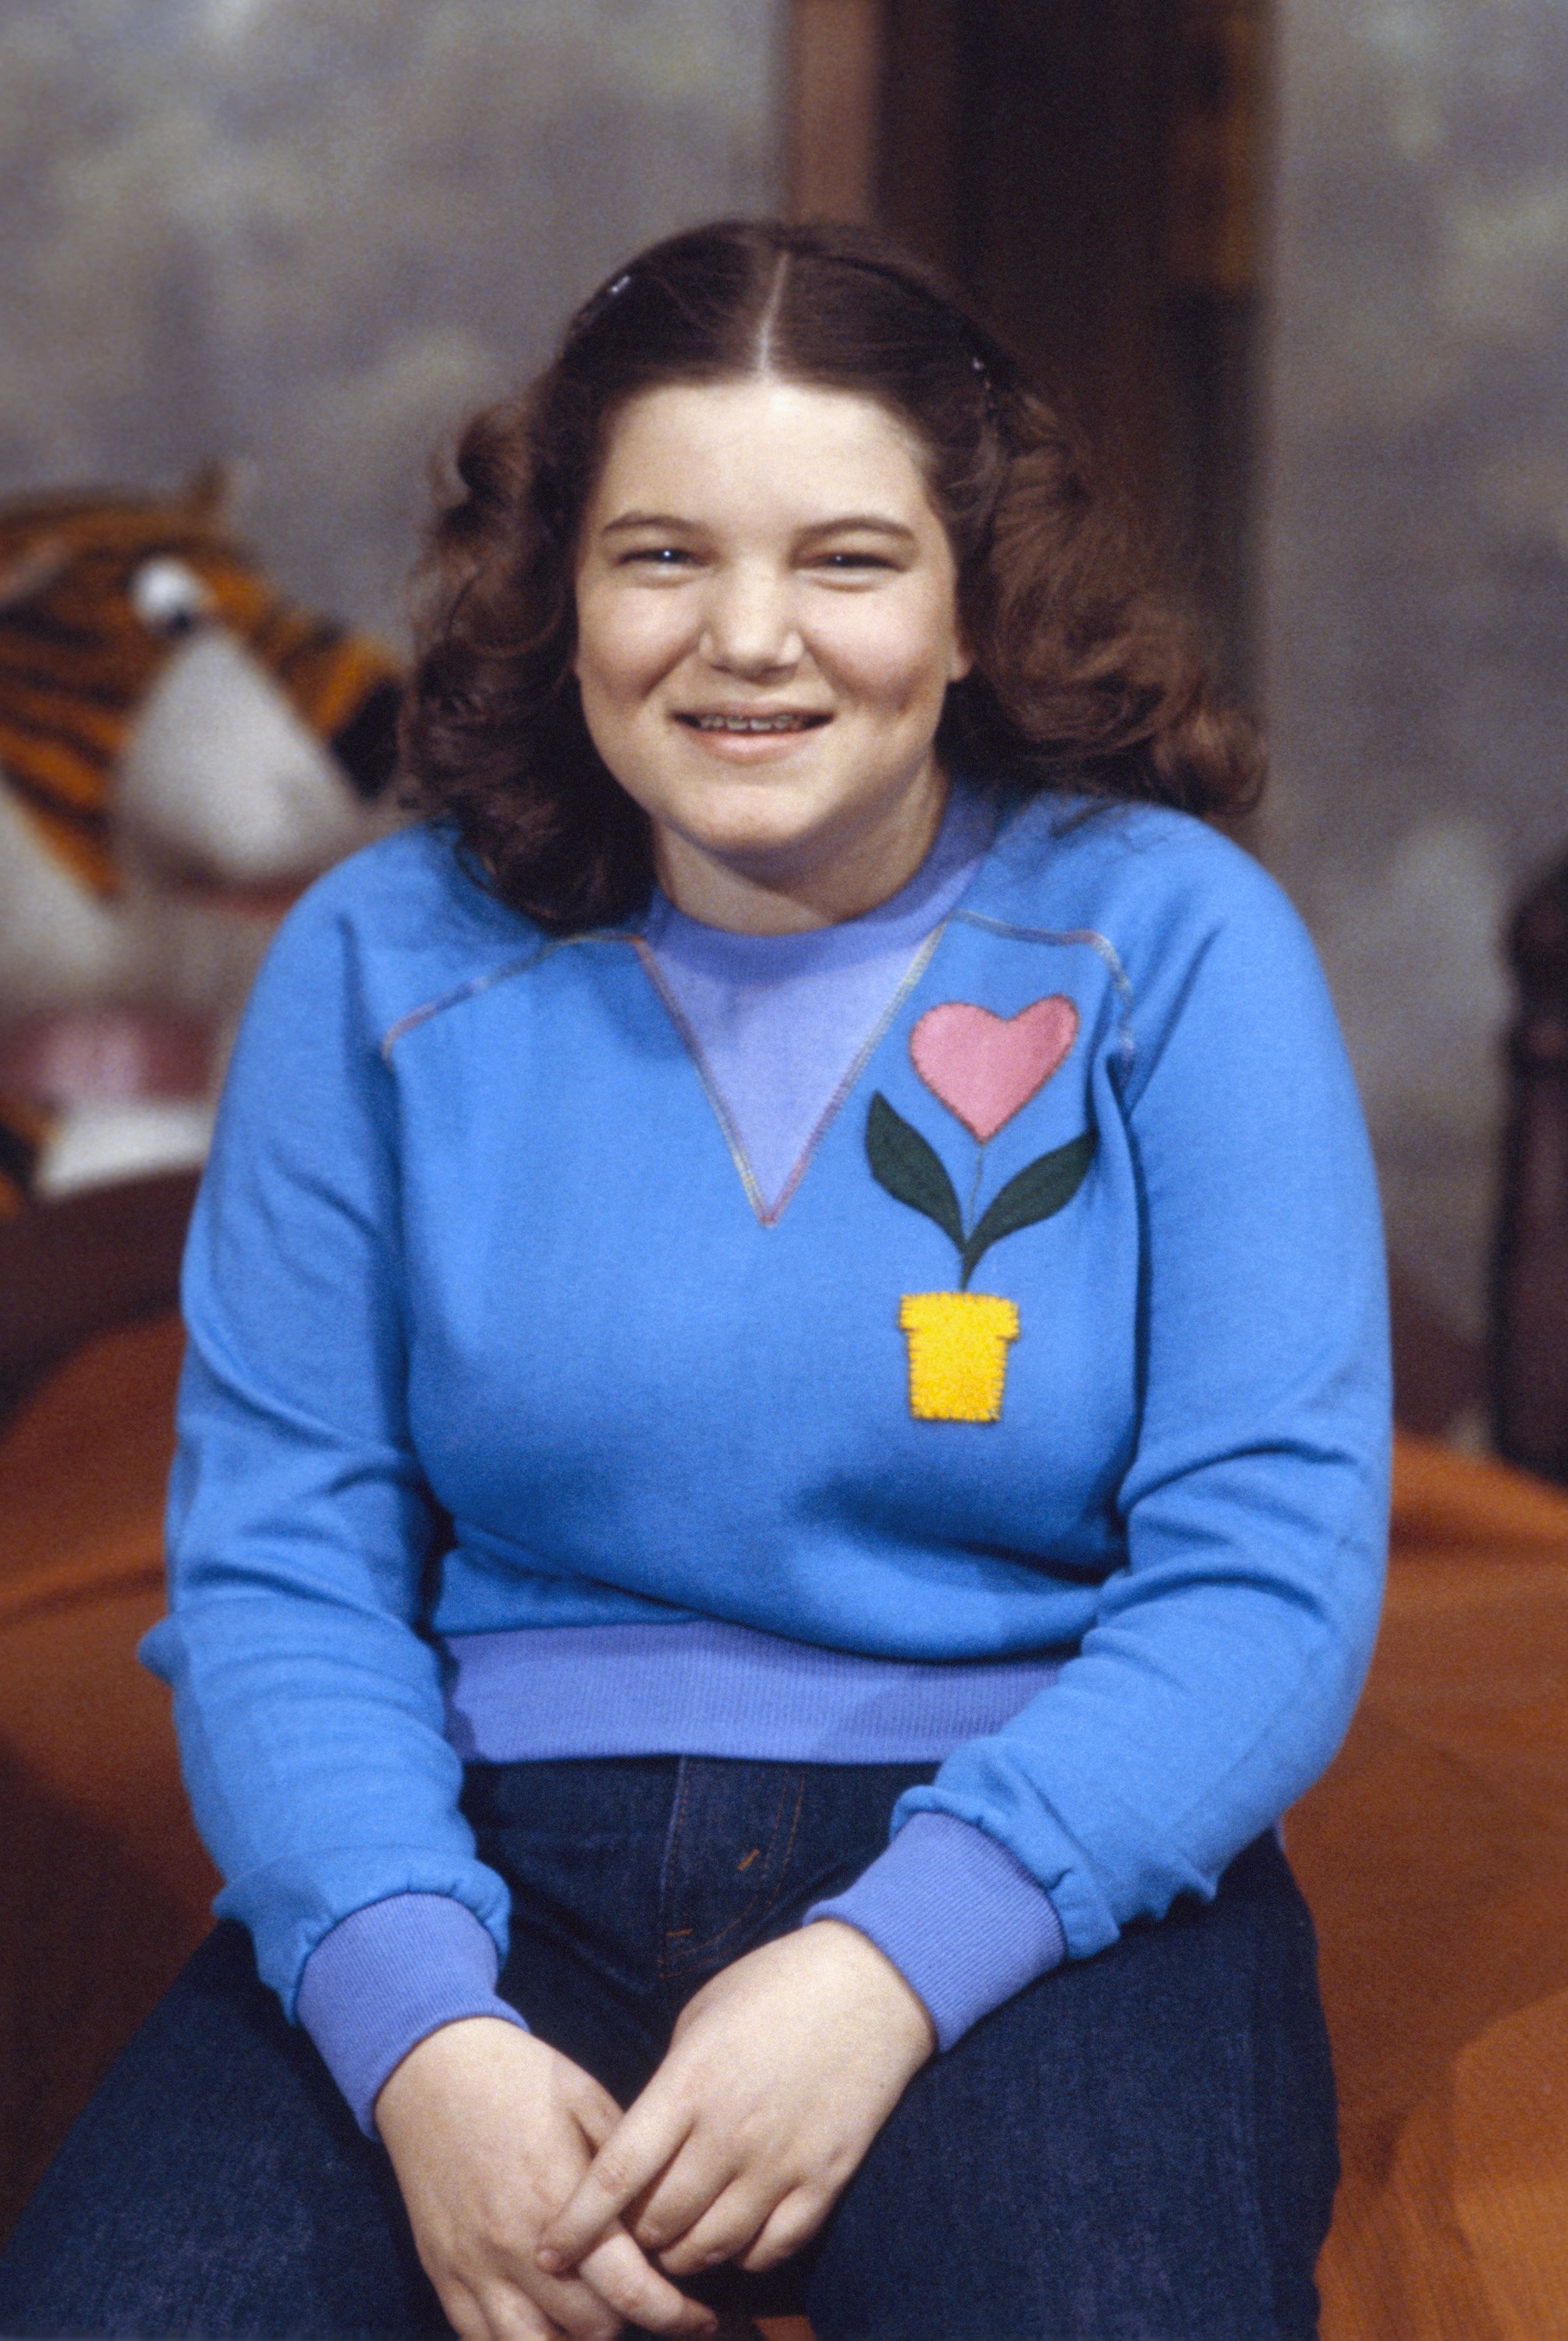 Mindy Cohn as Natalie Green on an episode of "The Facts of Life" on April 4, 1980 | Source: Getty Images